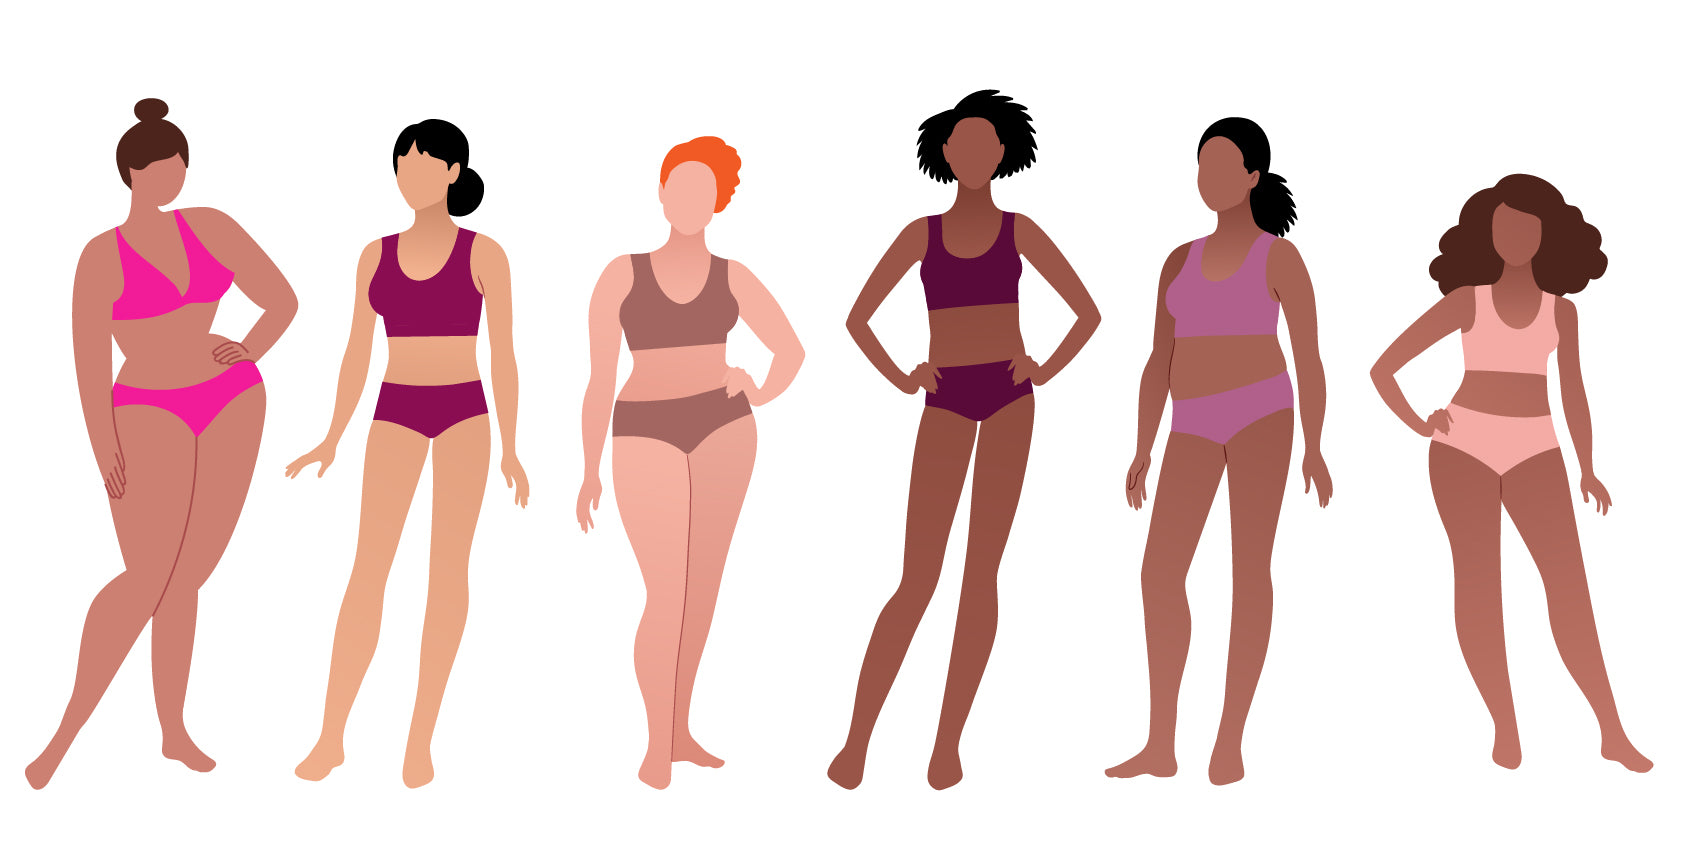 The Ultimate Guide to Dressing for Your Body Shape